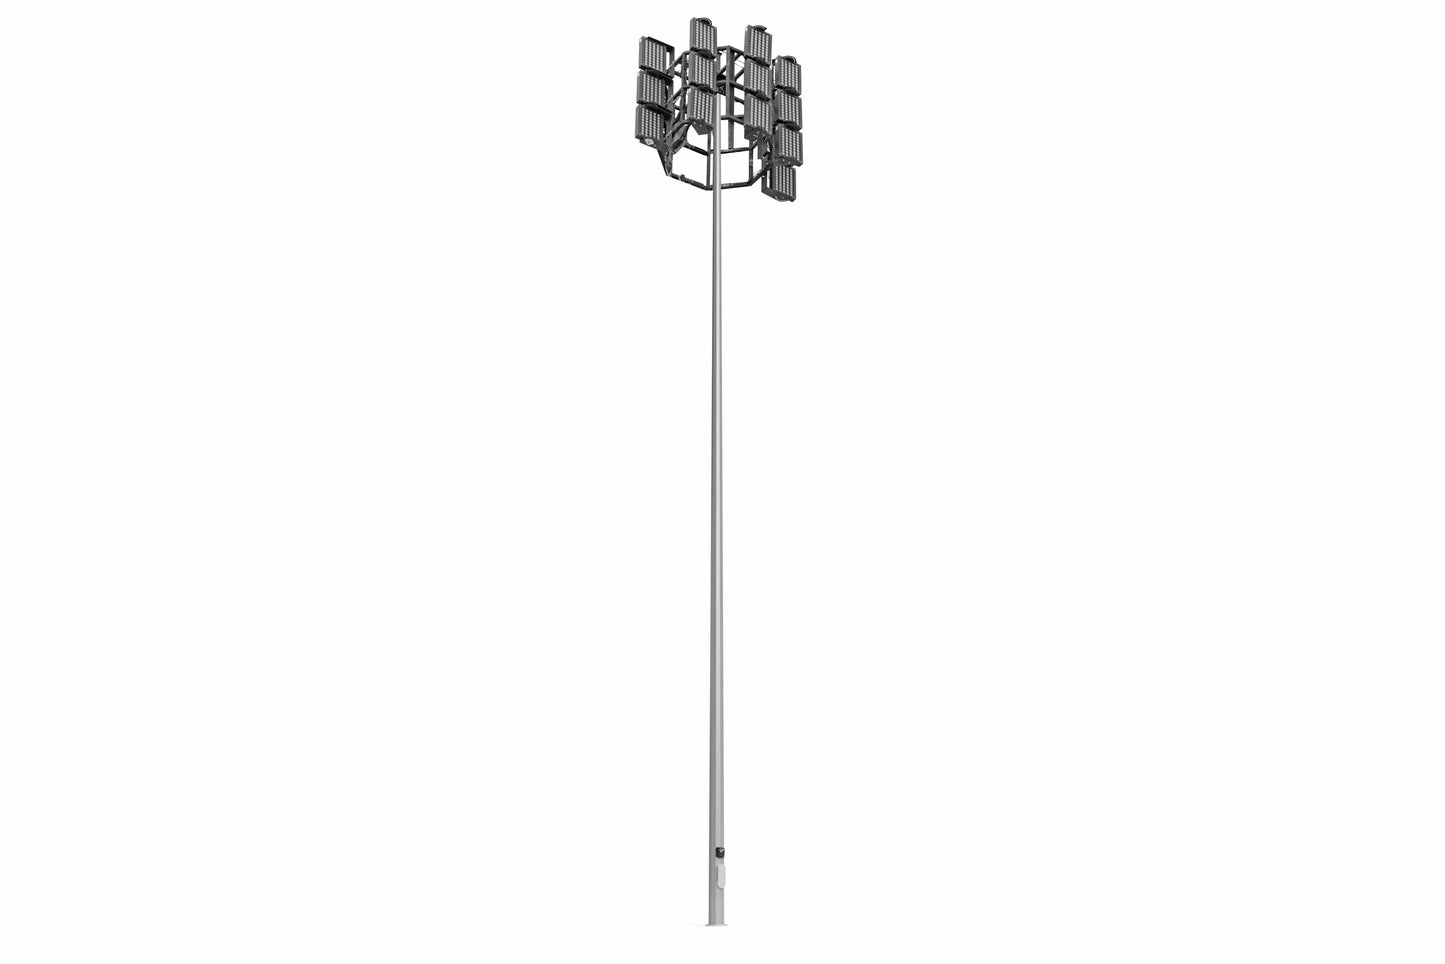 Larson Electronics 50' Stationary High Intensity LED Tower - Tapered Pole - (15) 480W LED Lights - Removable E-winch